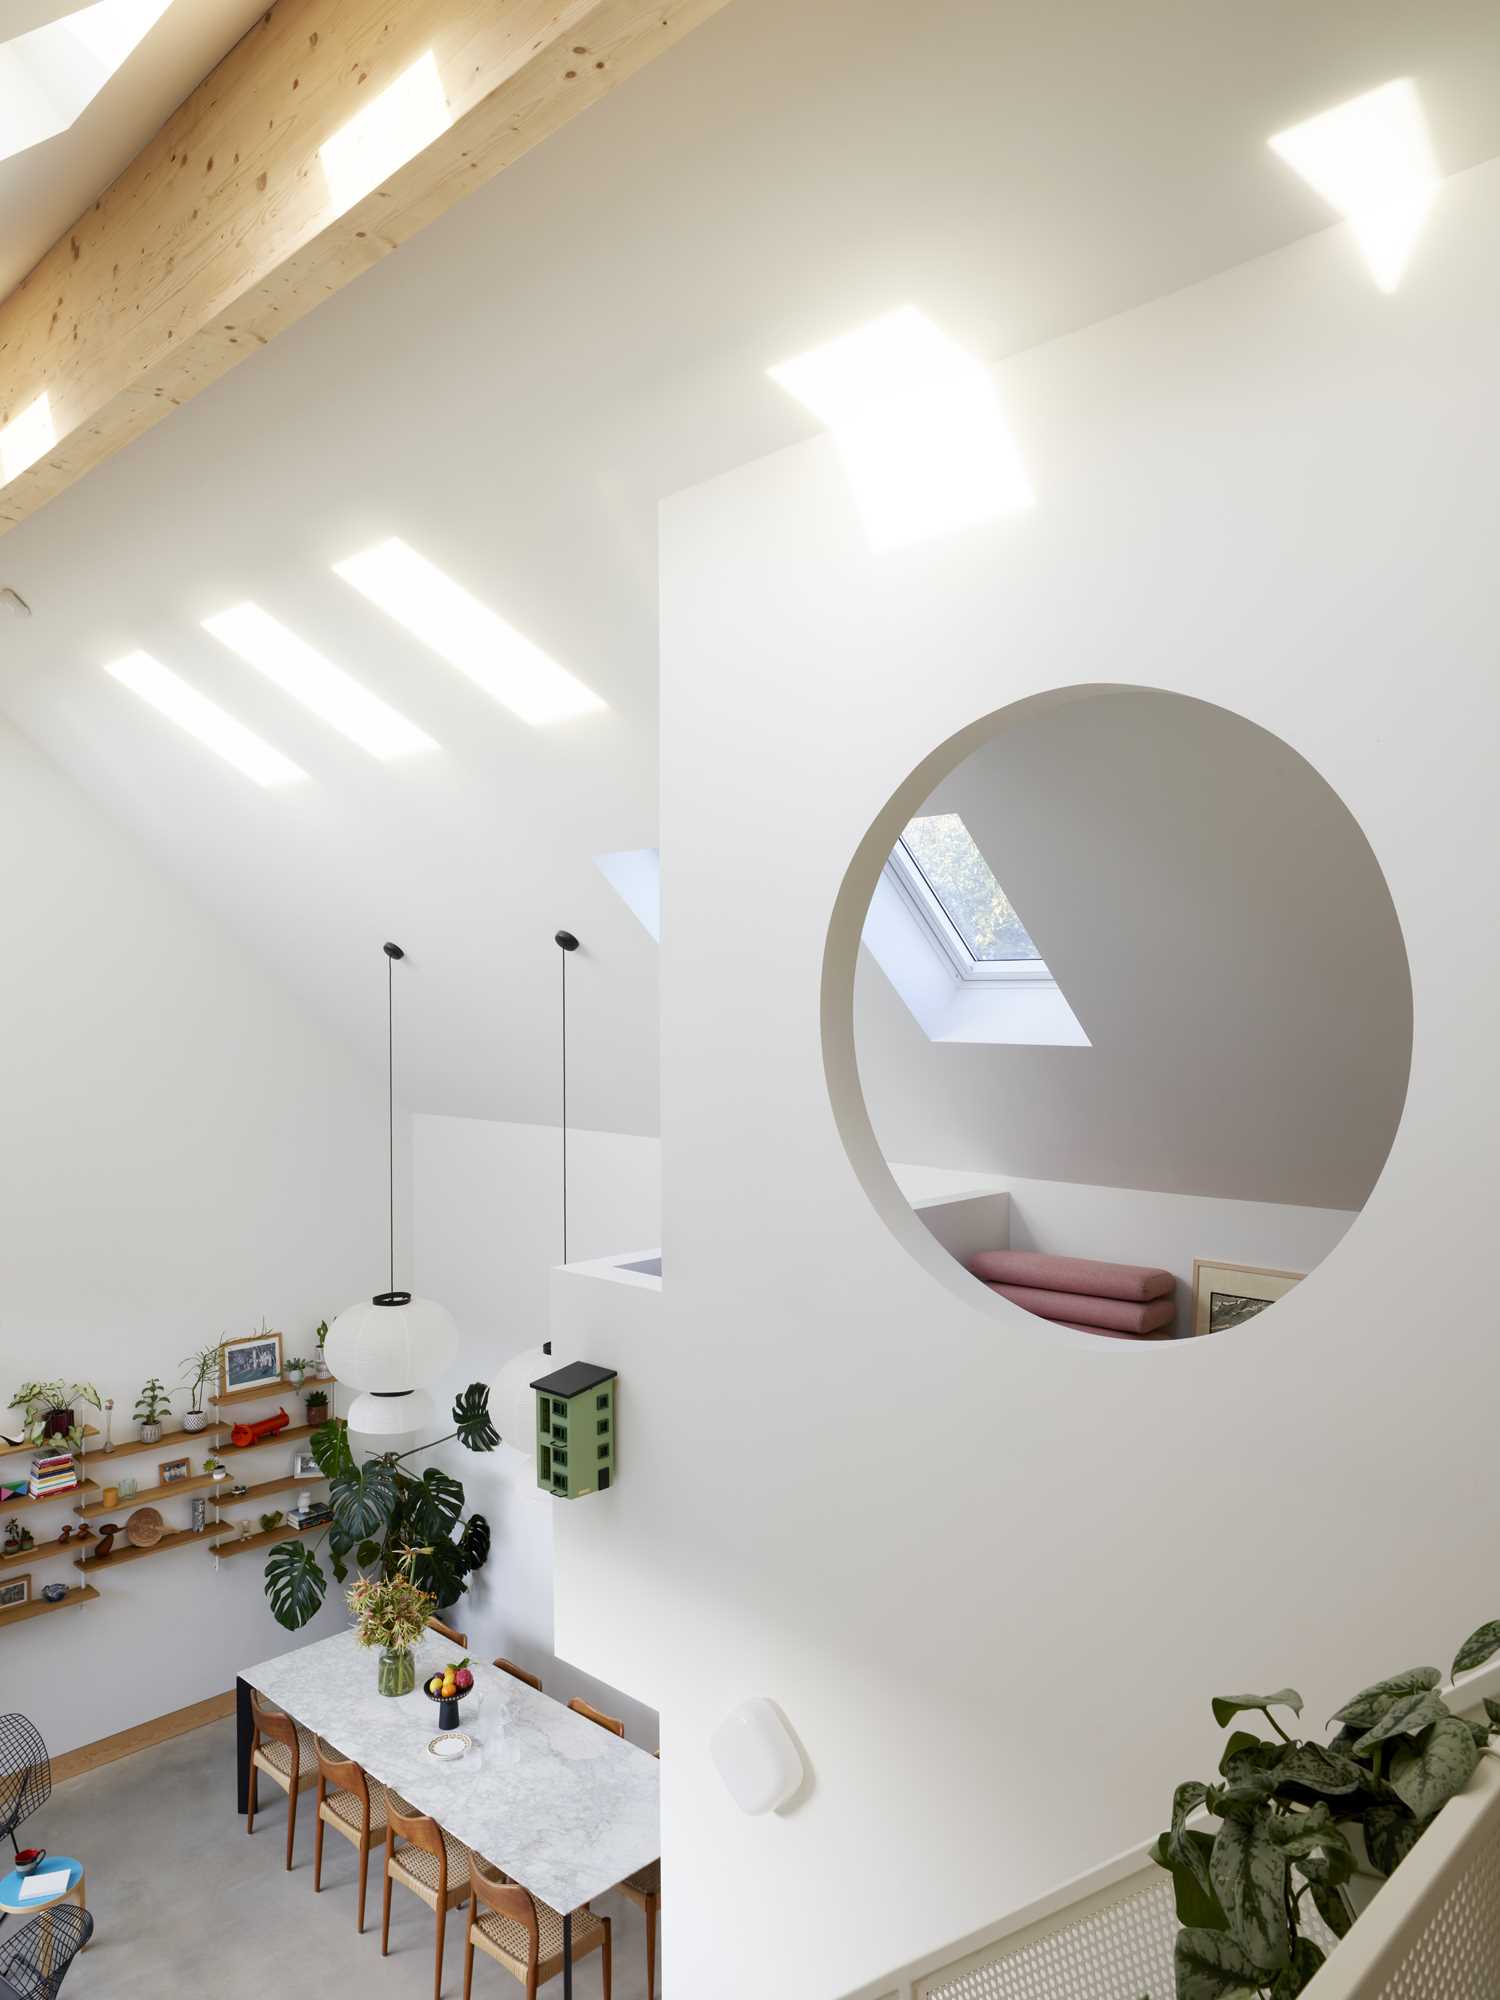 Stairs lead up to a lofted area, while the skylights add natural light throughout the interior.